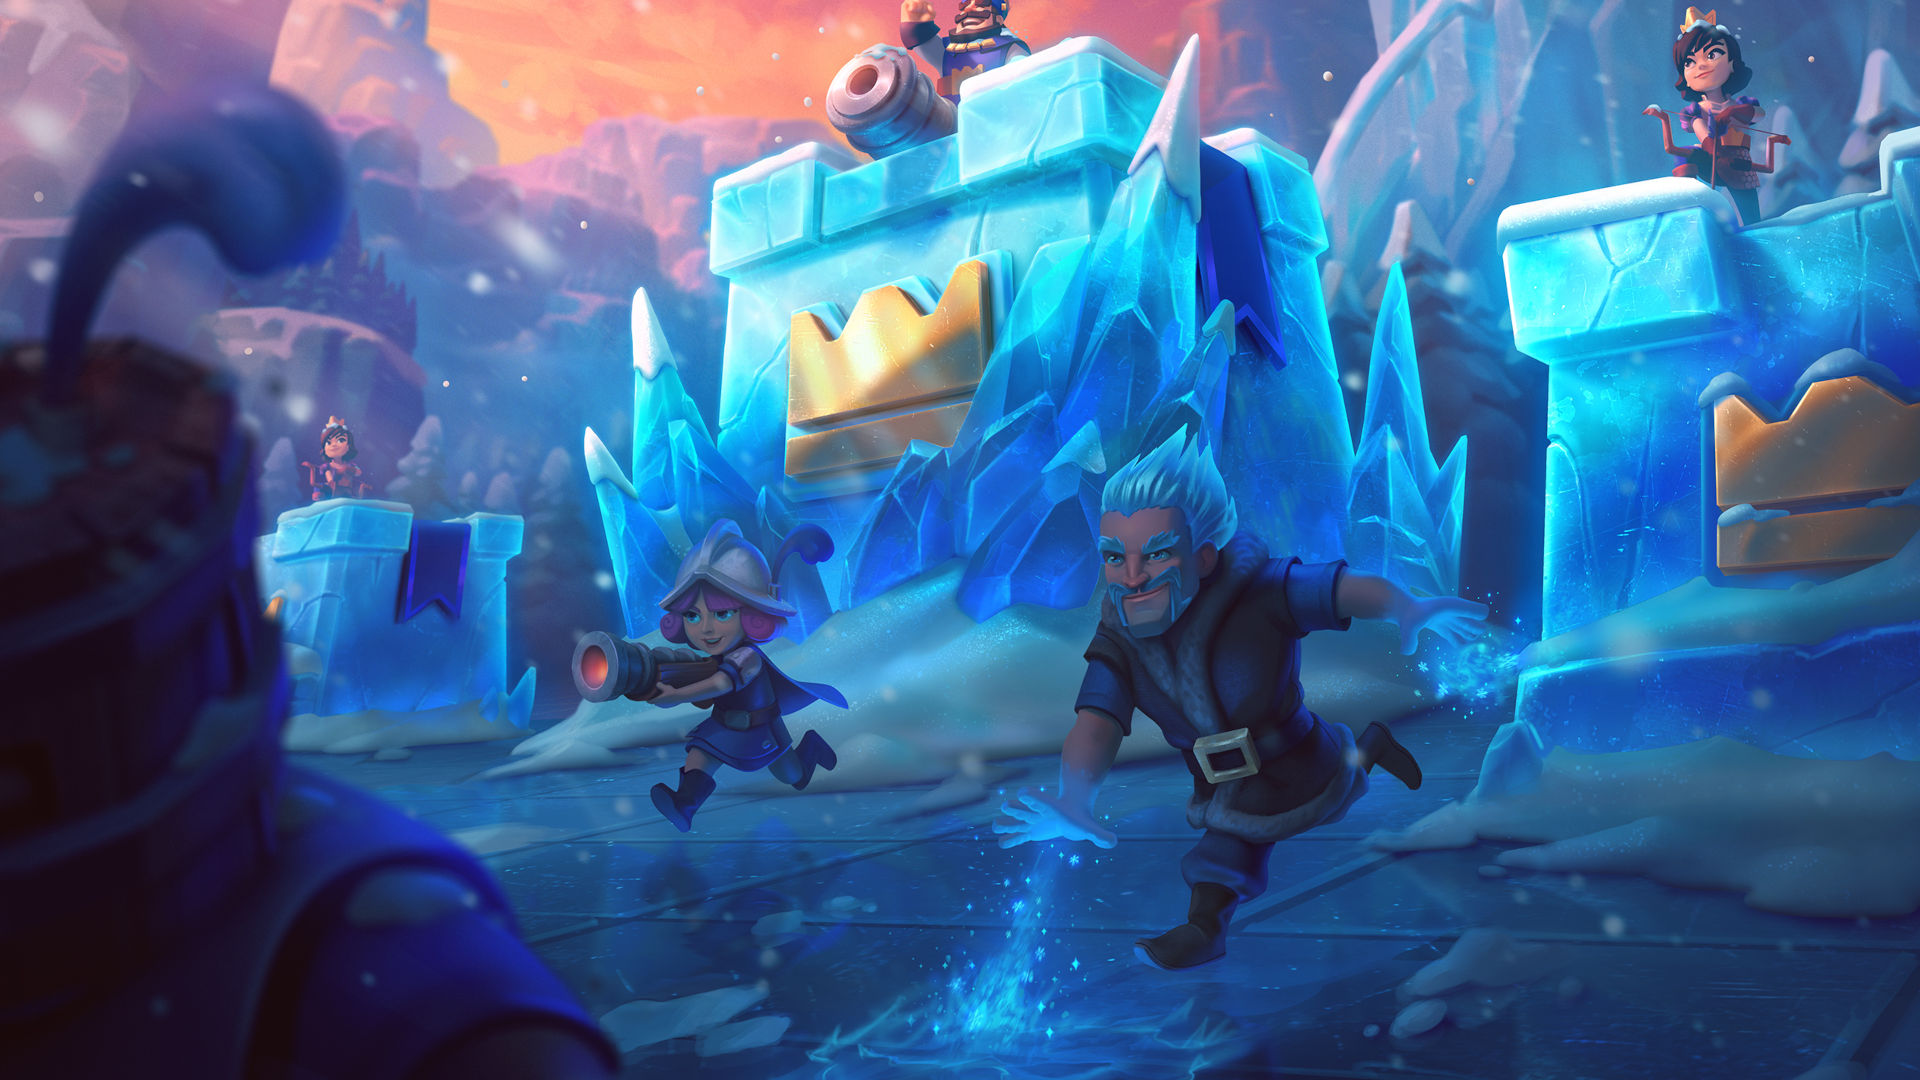 Clash Royale troops running across a crystal kingdom 